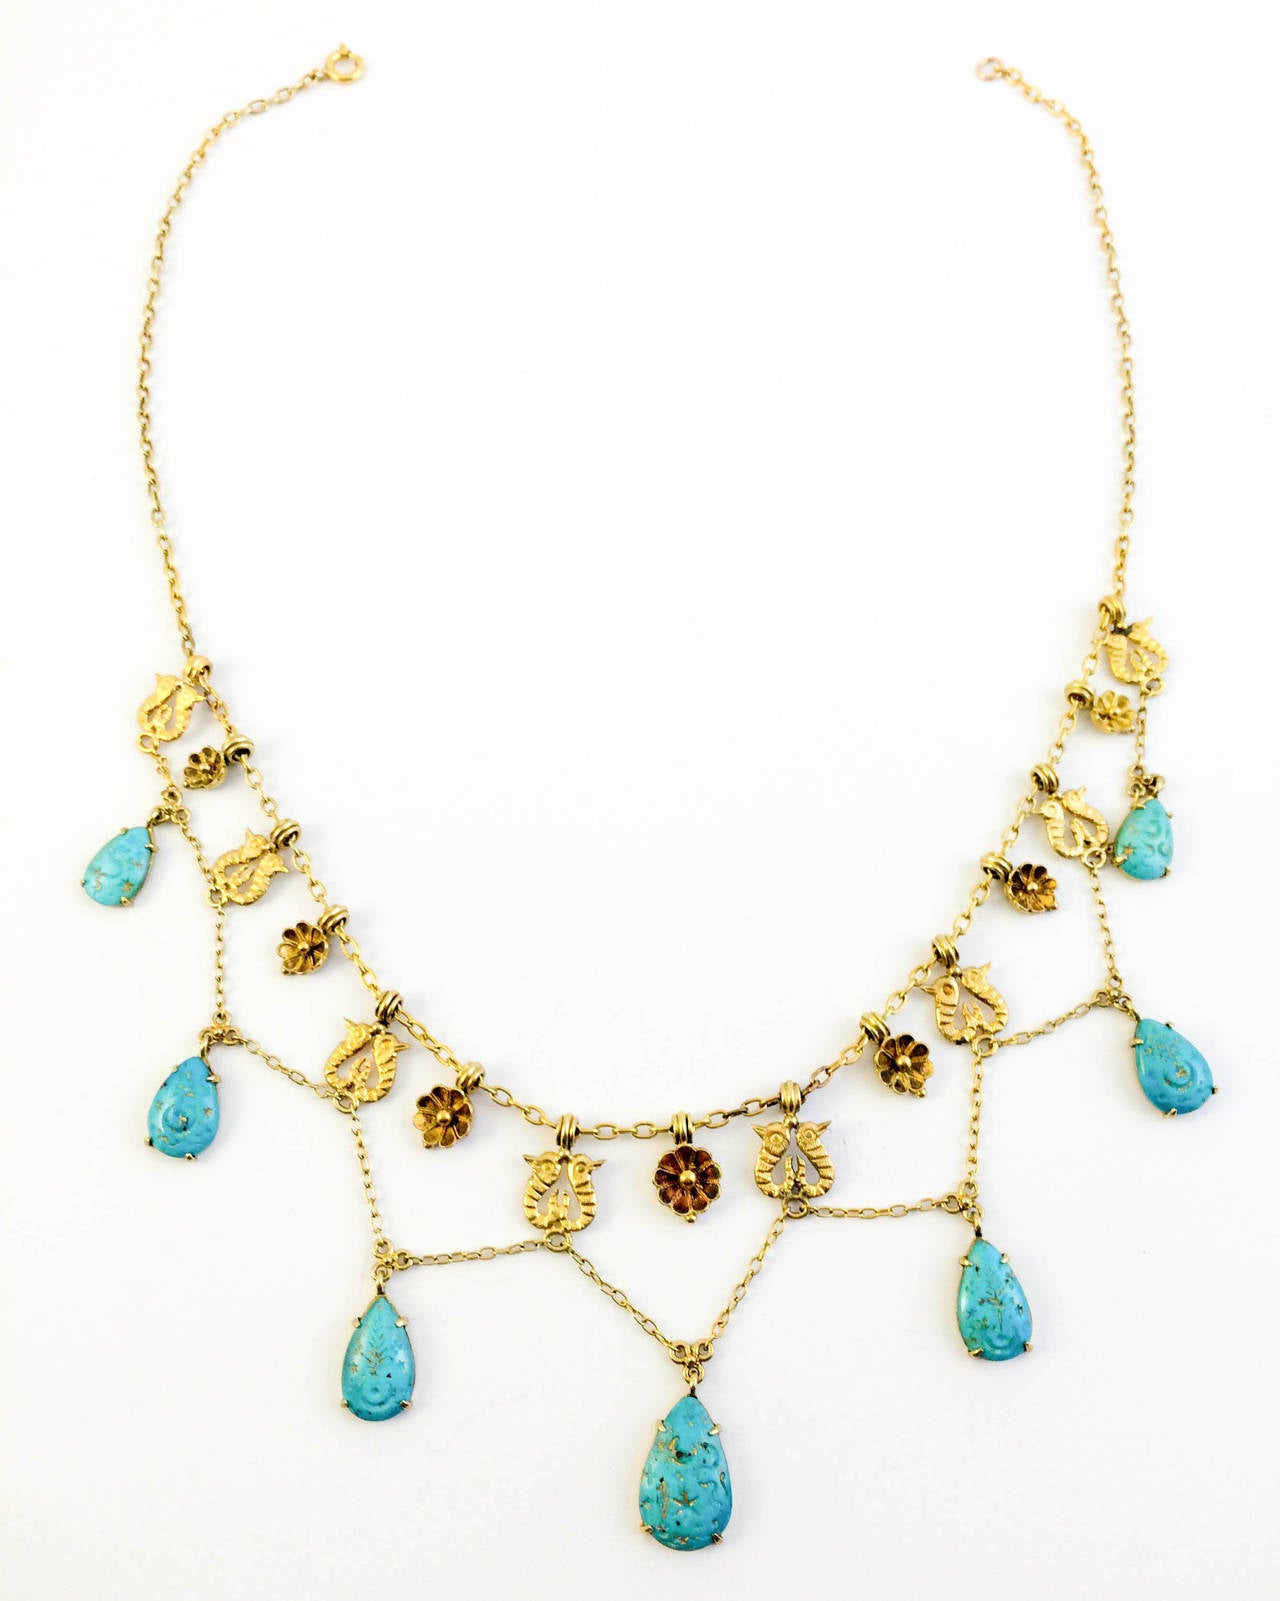 Gorgeous antique Turquoise and Gold Necklace. Egyptian revival motif. Beautiful carving on the turquoise beads. Gold has been worked to great deal of detail. Show-stopper necklace.

Period: 1920s

Origin: France

Style: Egyptian